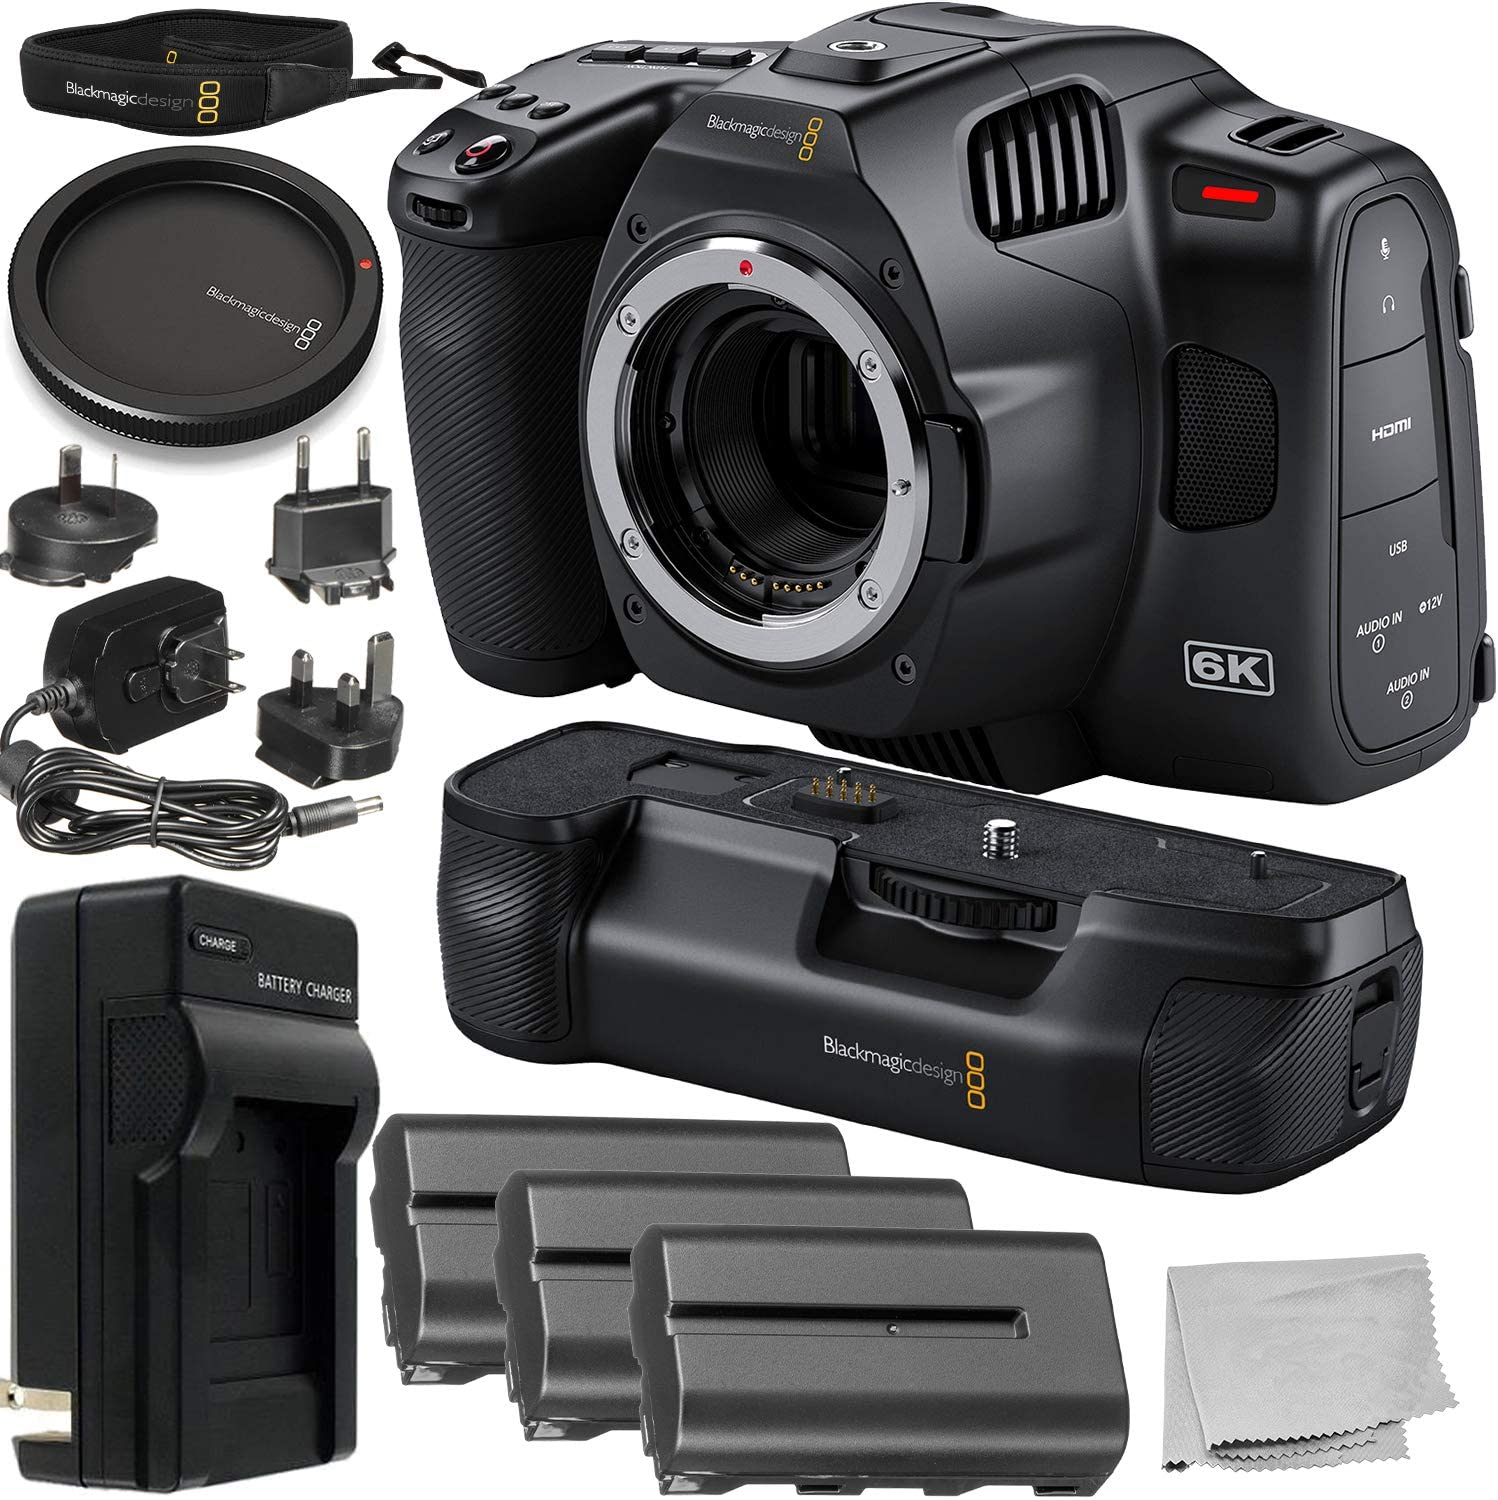 Blackmagic Design Pocket Cinema 6K Pro Camera (EF Mount) with Blackmagic Cinema Battery Grip and Starter Bundle - Includes: 3X Replacement Batteries, AC/DC Rapid Travel Charger and More